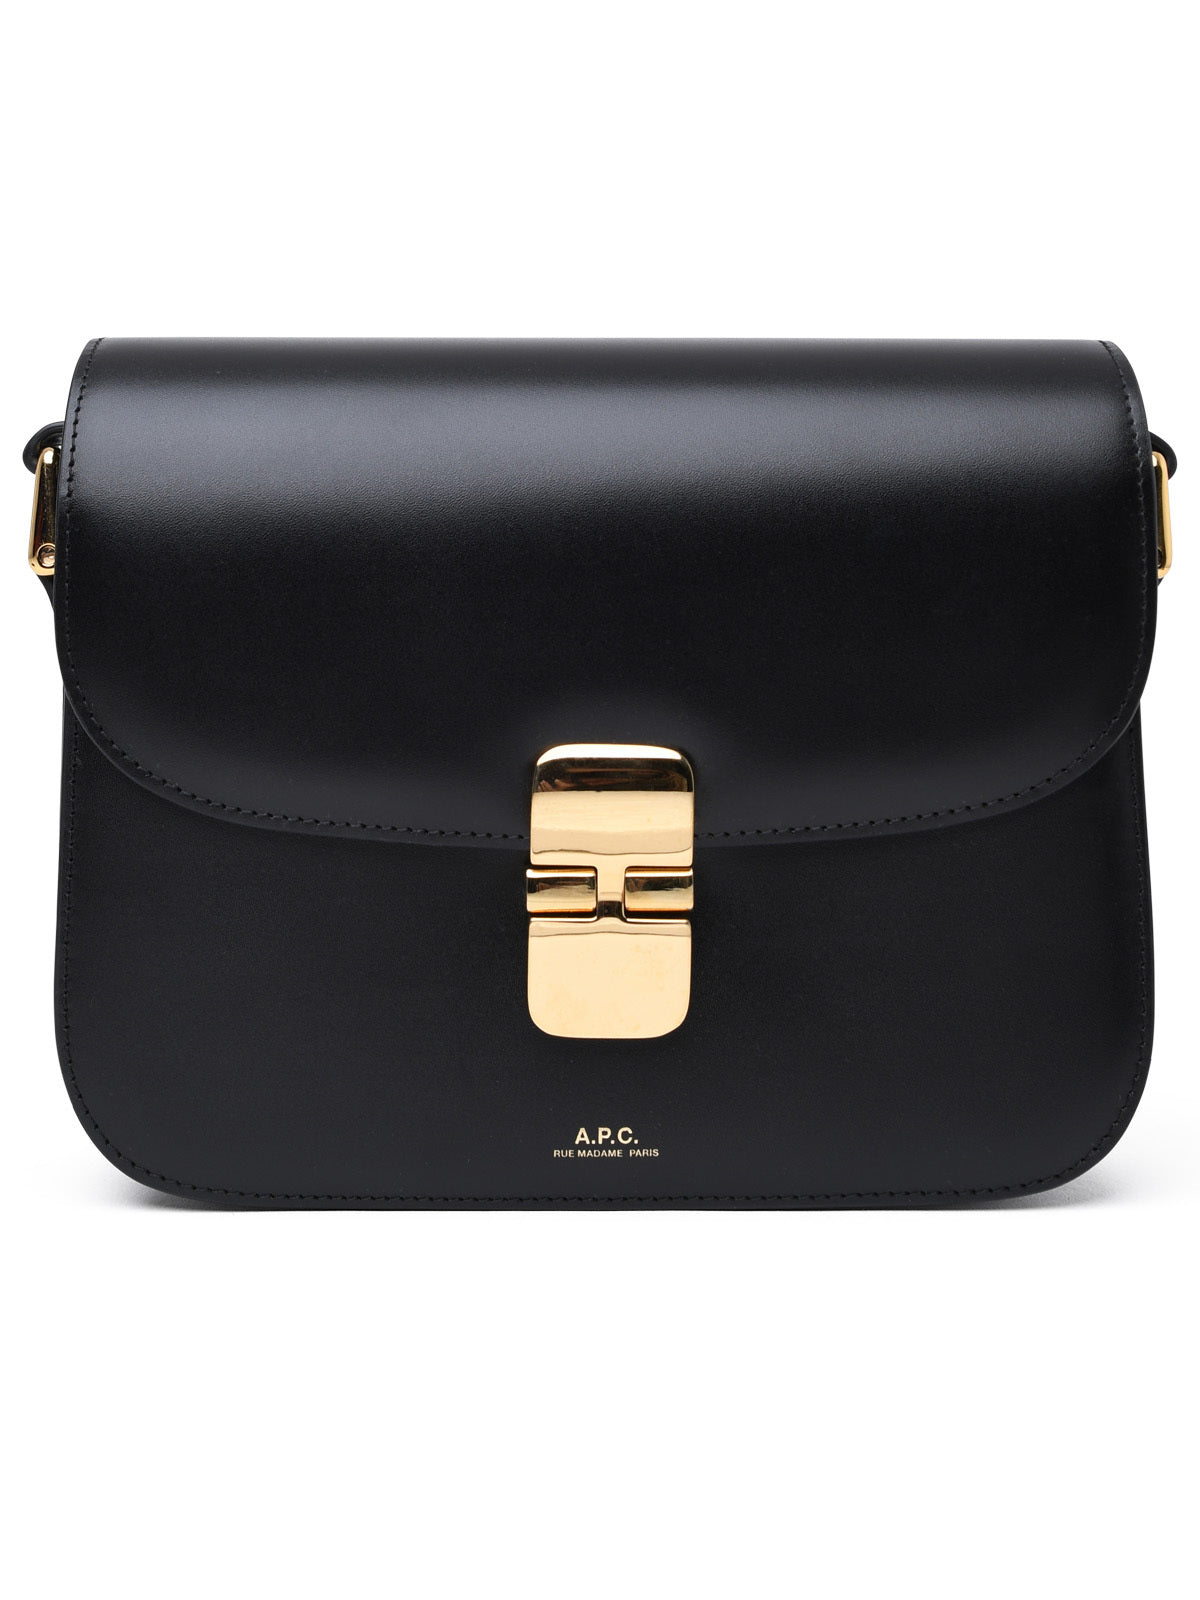 A.P.C. Woman Small Leather Grace Bag